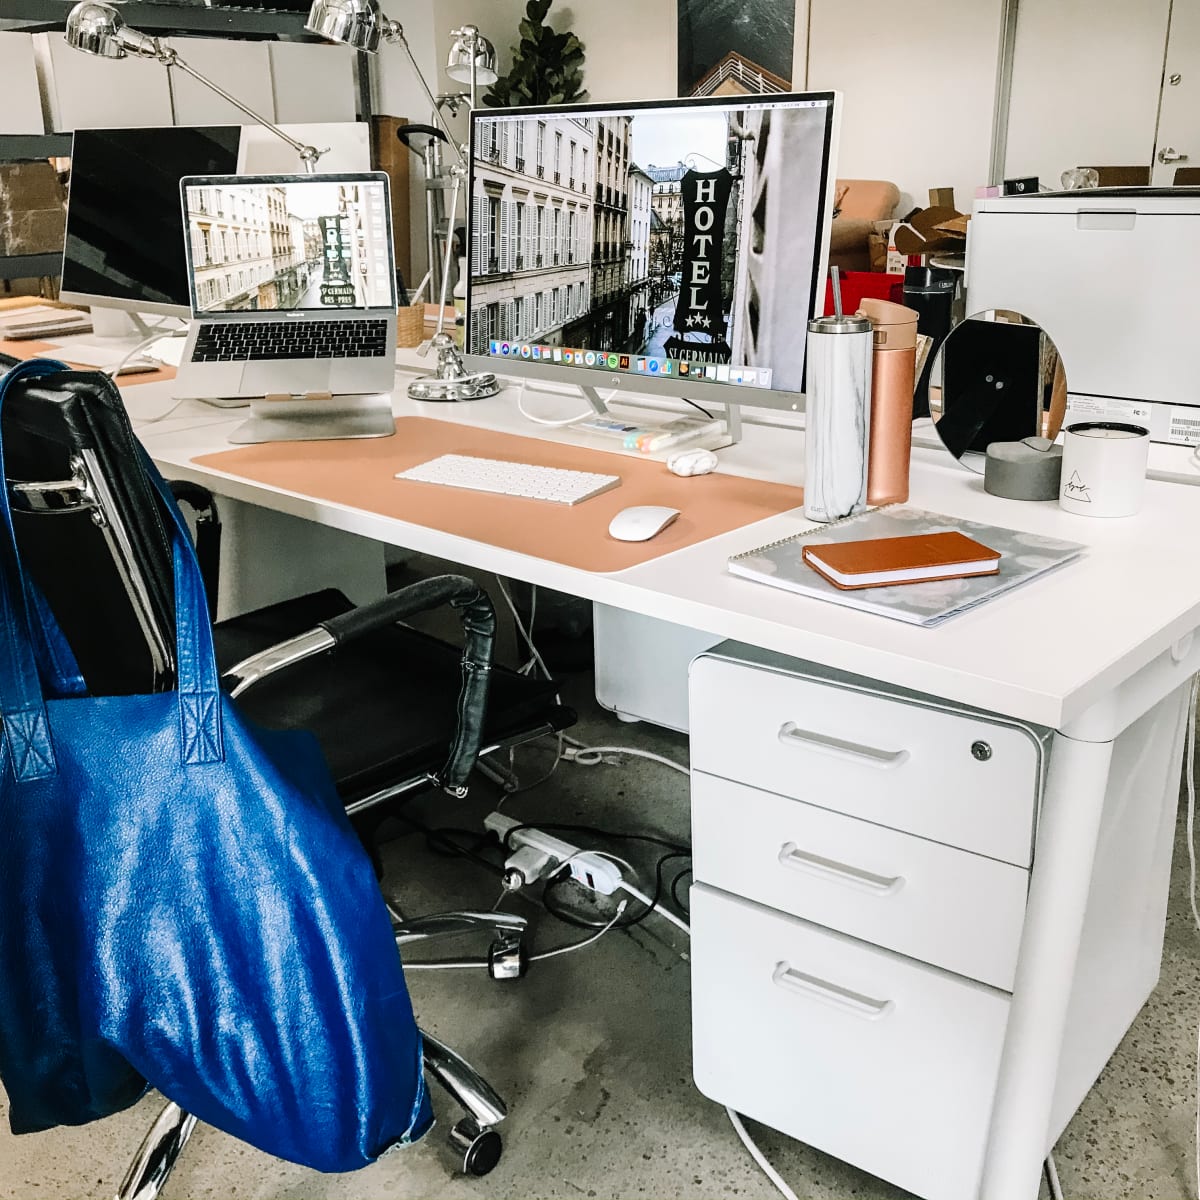 Should I shop for desk accessories? - Office desk dilemmas: What does your  work desk say about you